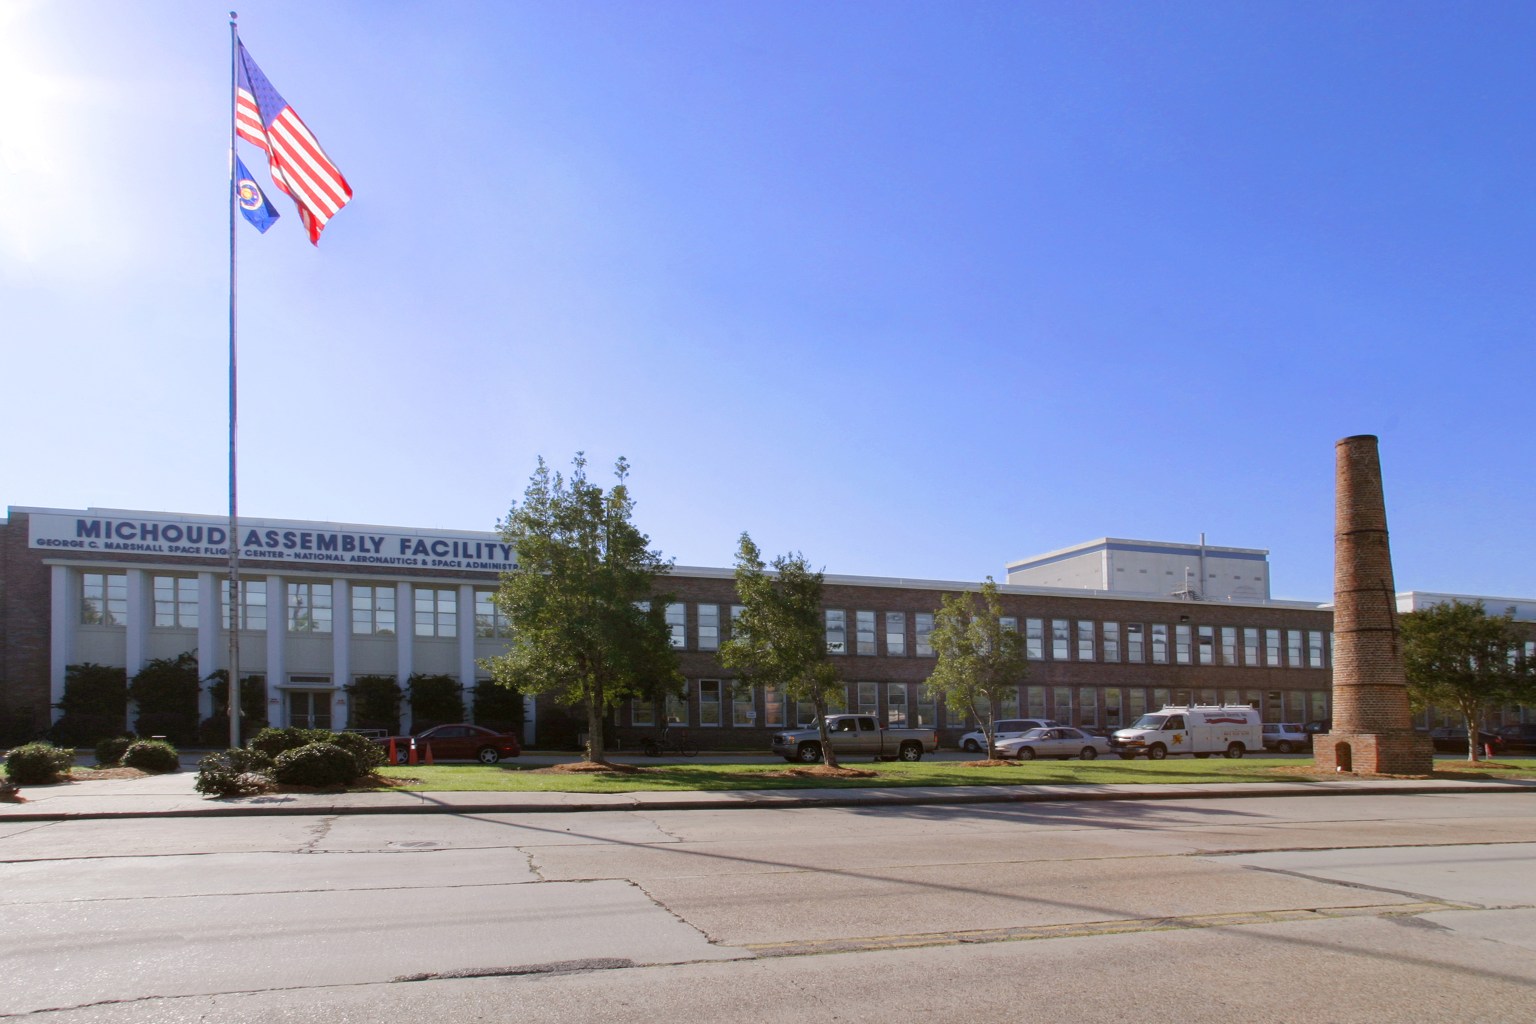 The outside of of NASA's Michoud Assembly Facility in New Orleans with an American flag on the left side of the photo.